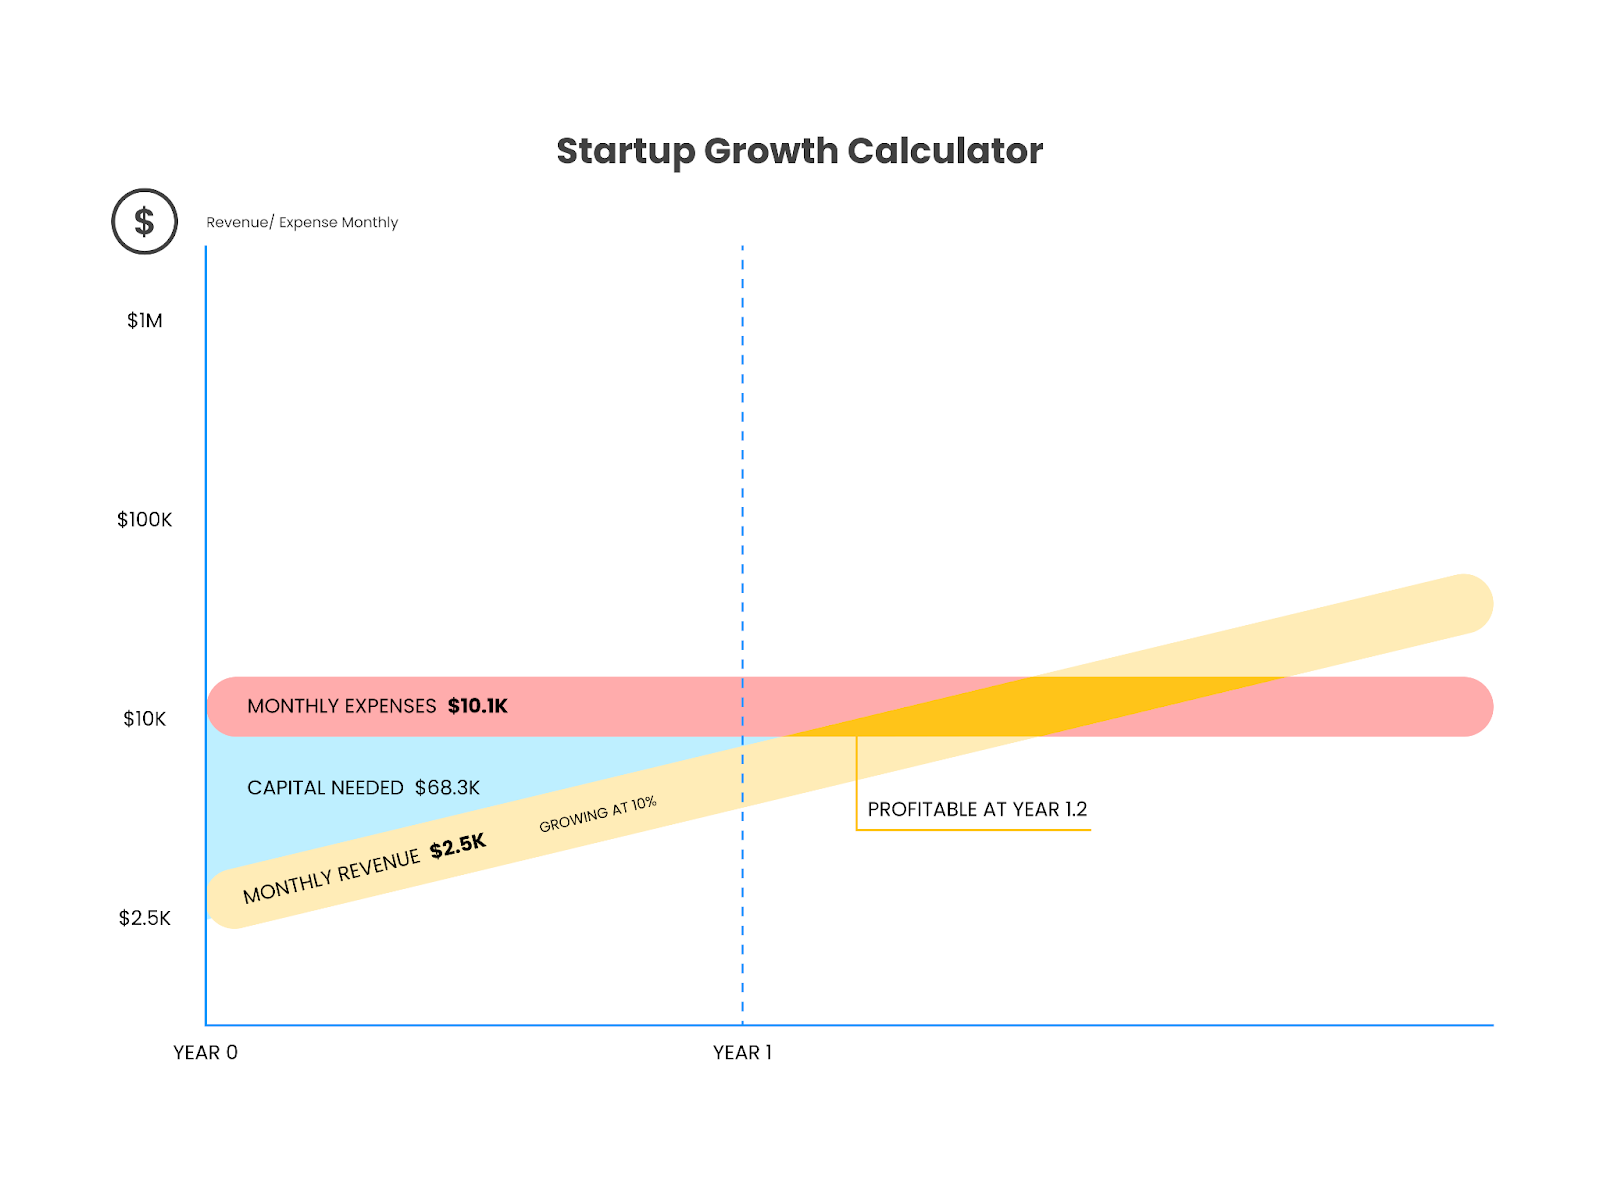 A chart showing startup revenue, and expenses using fictional data courtesy of growth.tlb.org